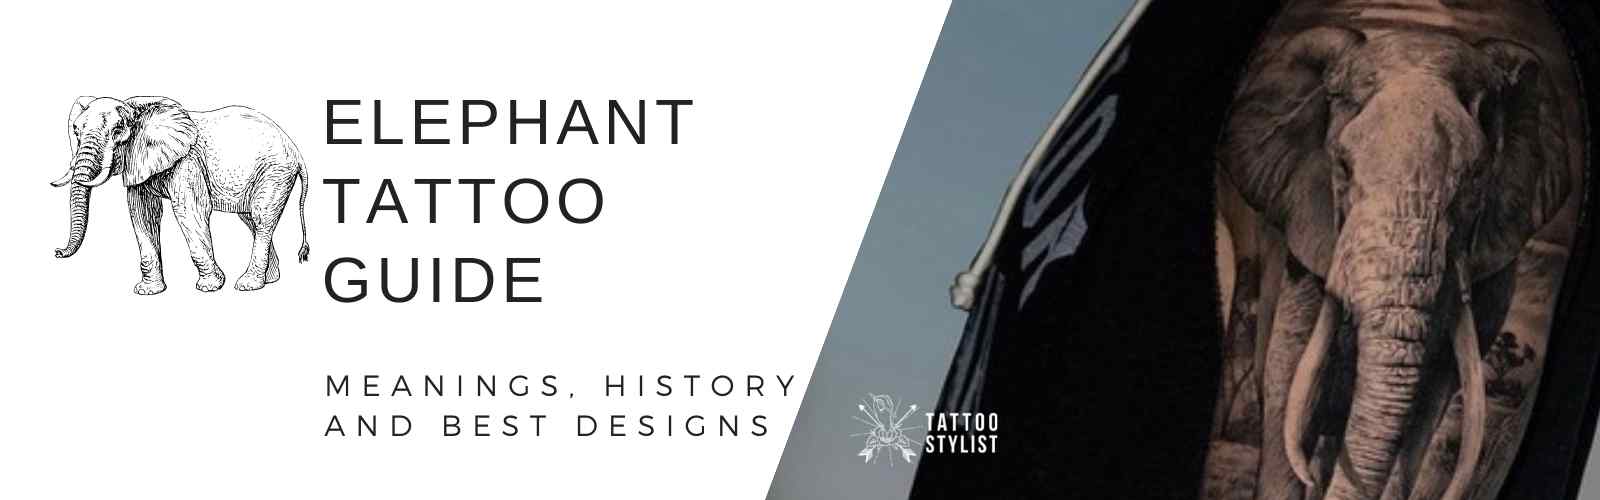 elephant tattoo guide featured image